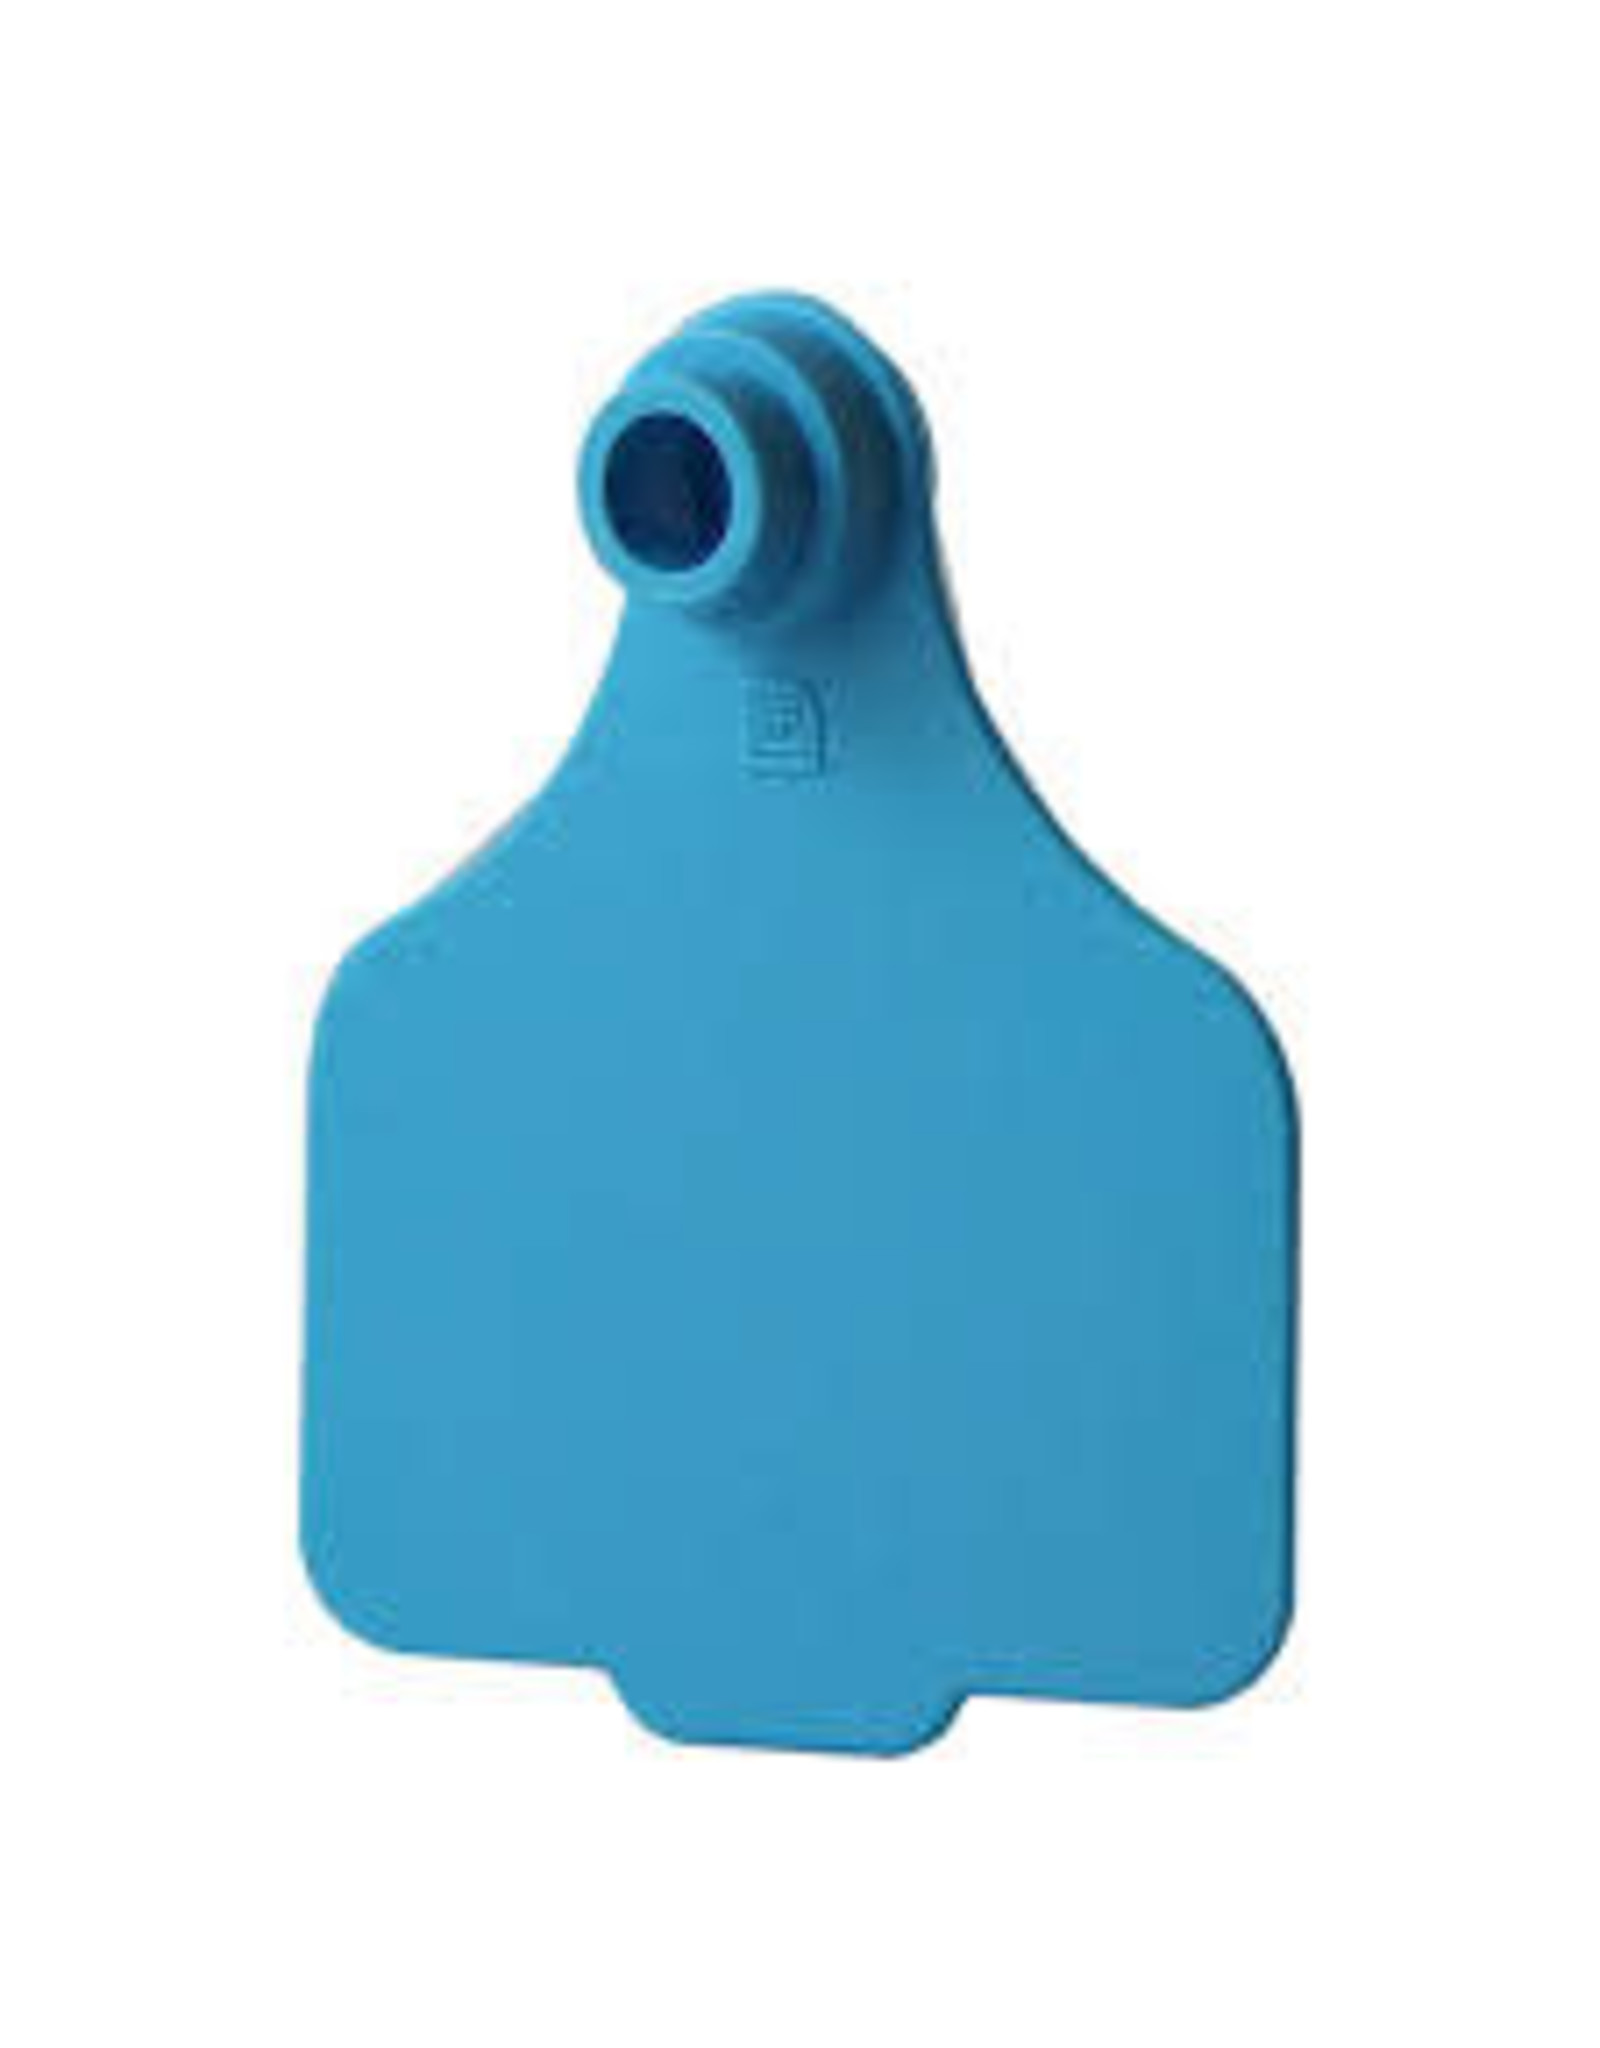 Leader TAG* LEADER 2 PC LARGE TAGS 25's - Blue  2PL11-   58.20 (w) x 72.50 (h) x 12.80 (d) mm